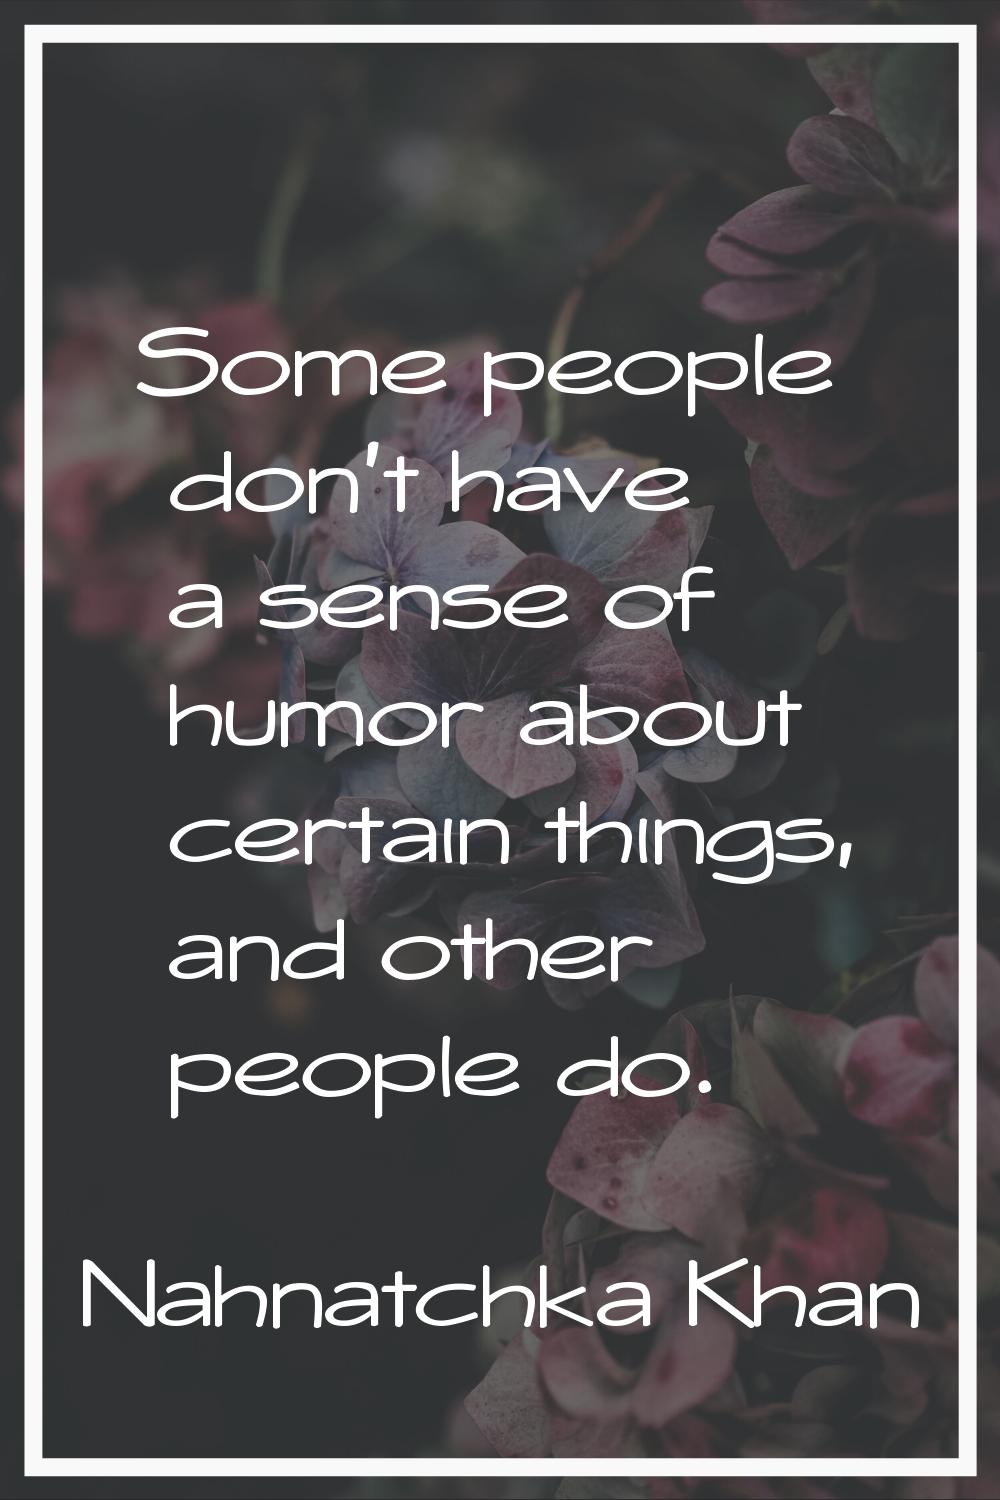 Some people don't have a sense of humor about certain things, and other people do.